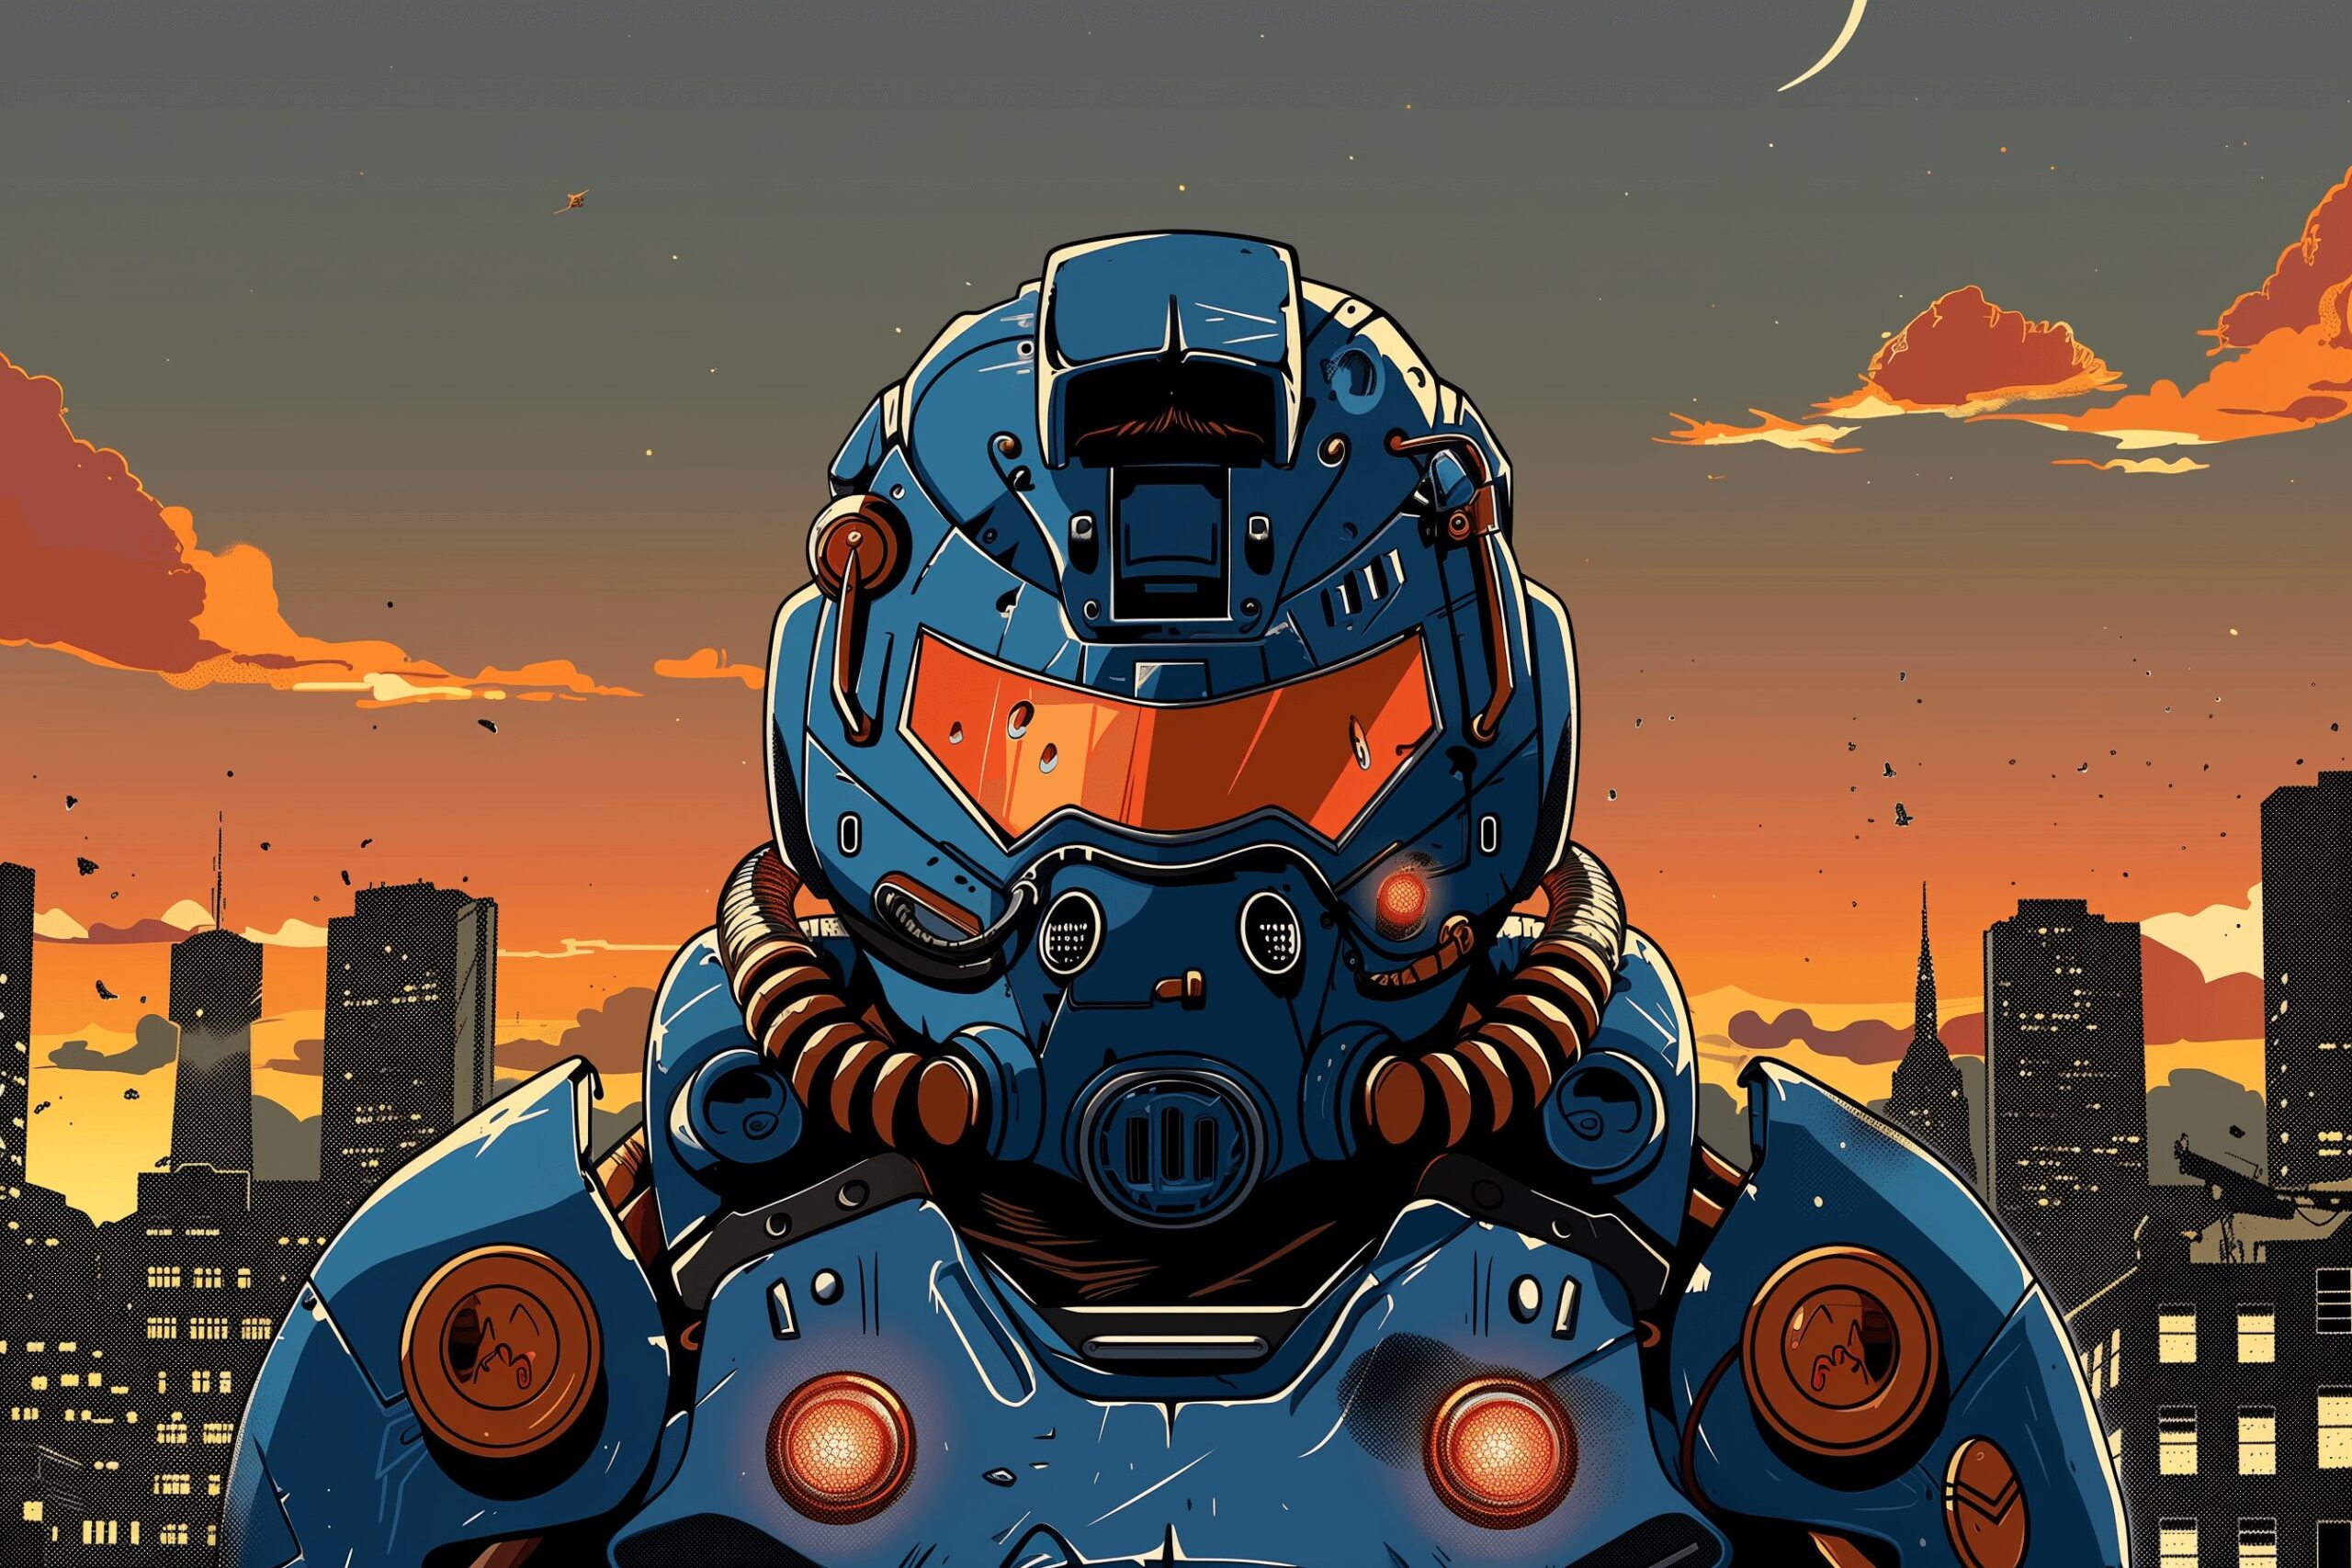 fanart of the Fallout power armor